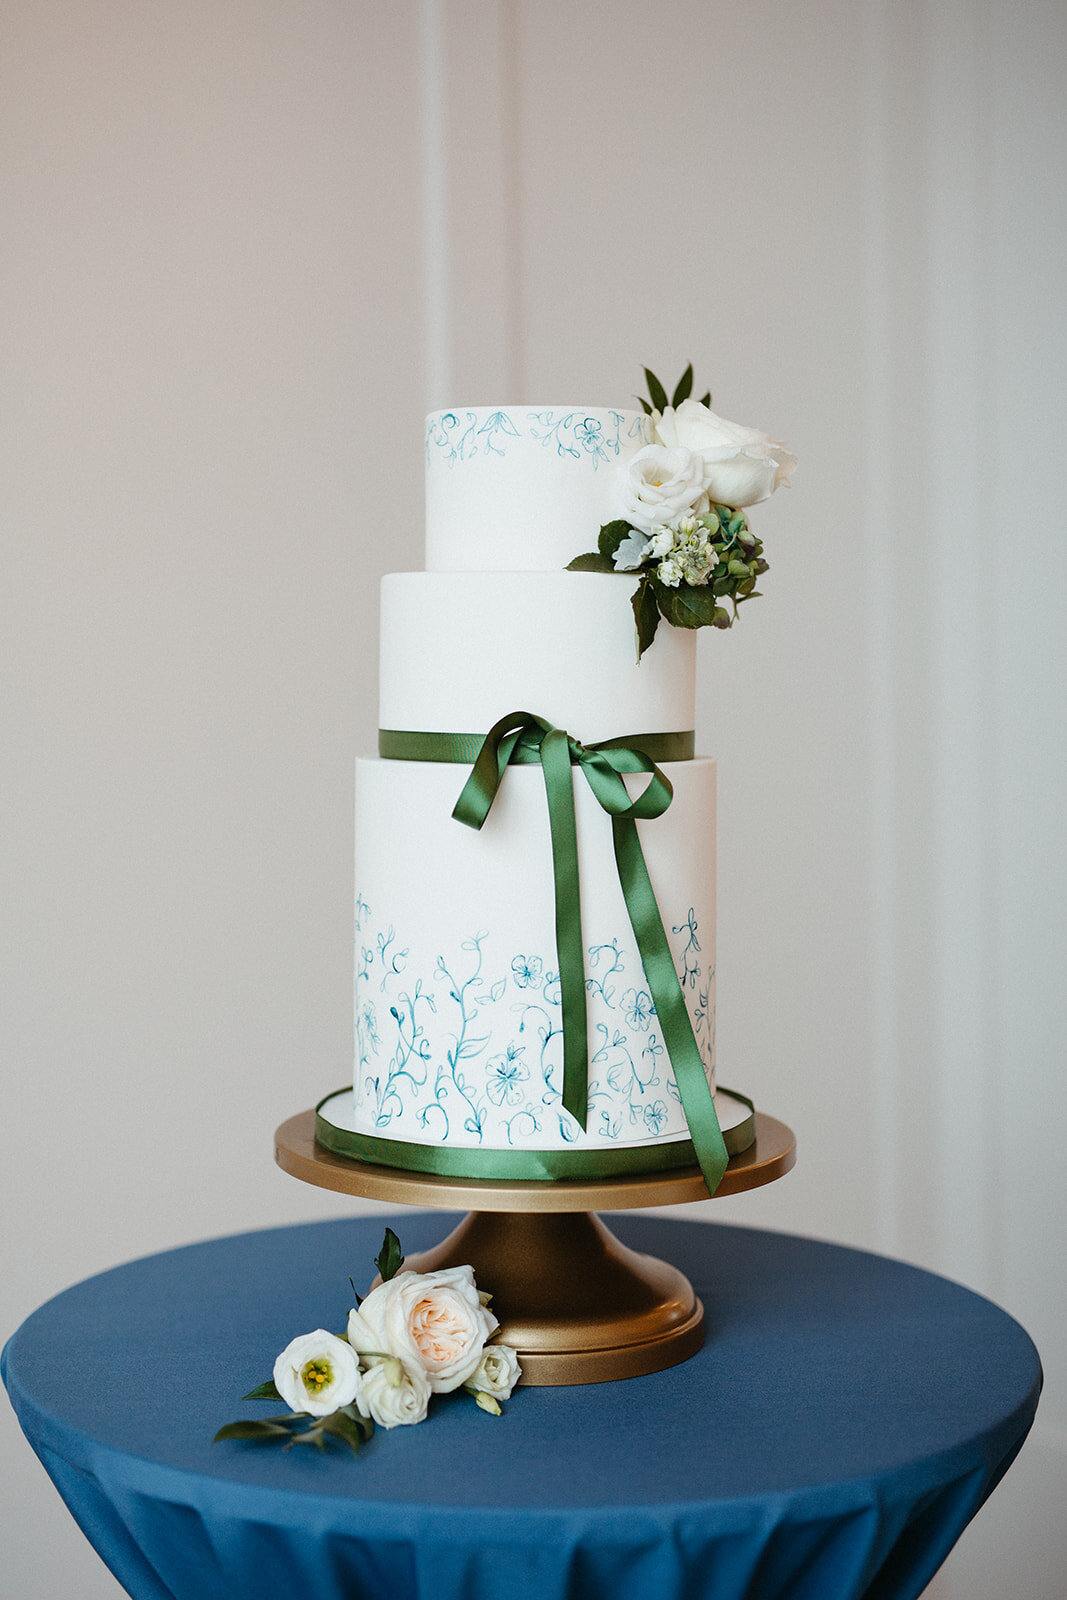 White cake with green ribbon and flowers on a gold cake stand atop a rounded table with blue linen.